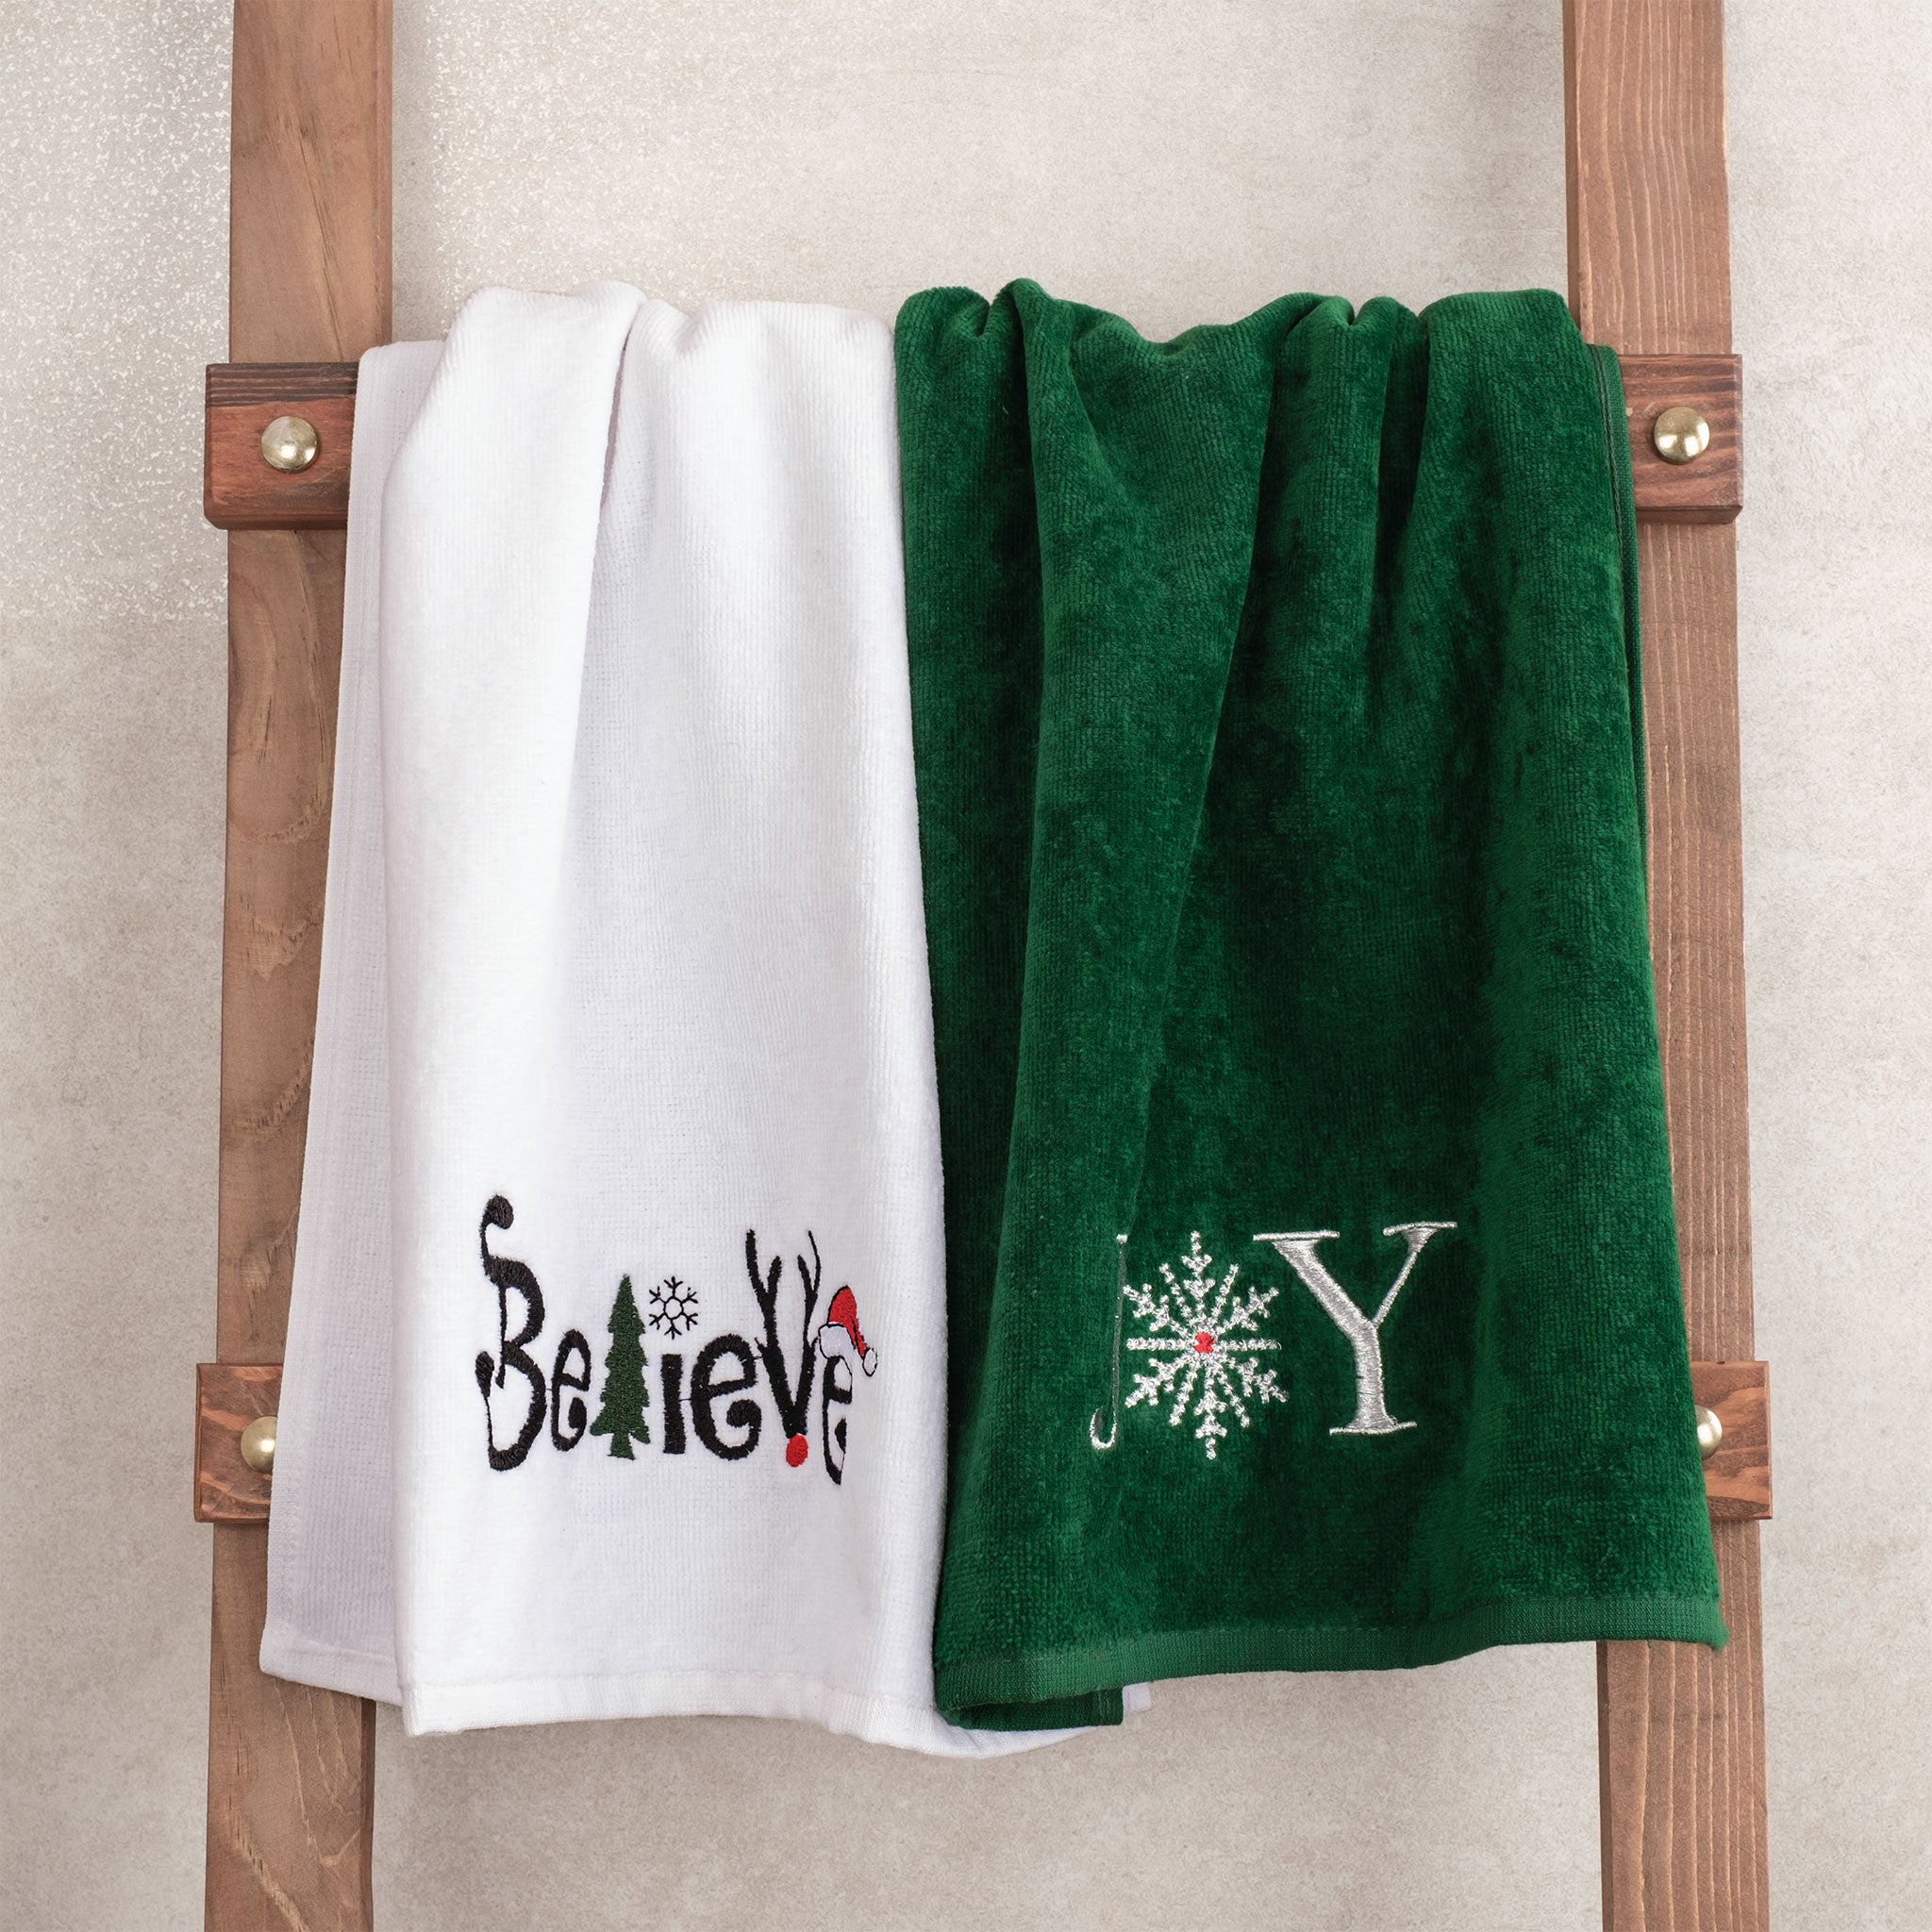 American Soft Linen - Christmas Towels 2 Packed Embroidered Towels for Decor Xmas - Joy-Believe - 1